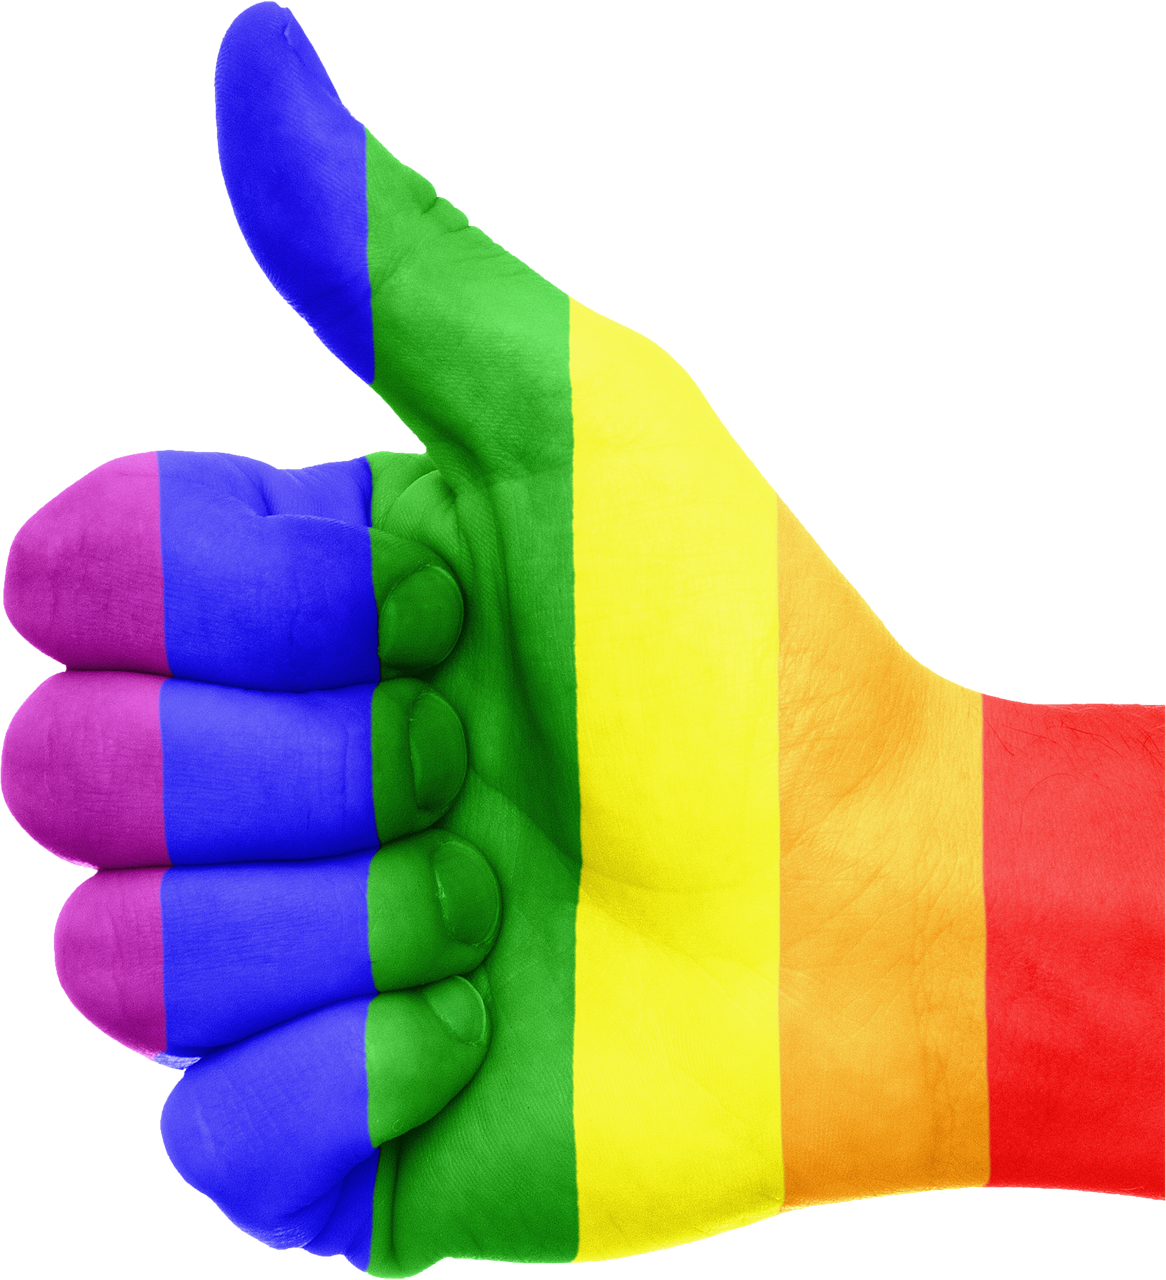 What does the site you're applying to say about its LGBTQ training opportunities and affirmative environment? (Source: Kurious on Pixabay. Some rights reserved.)